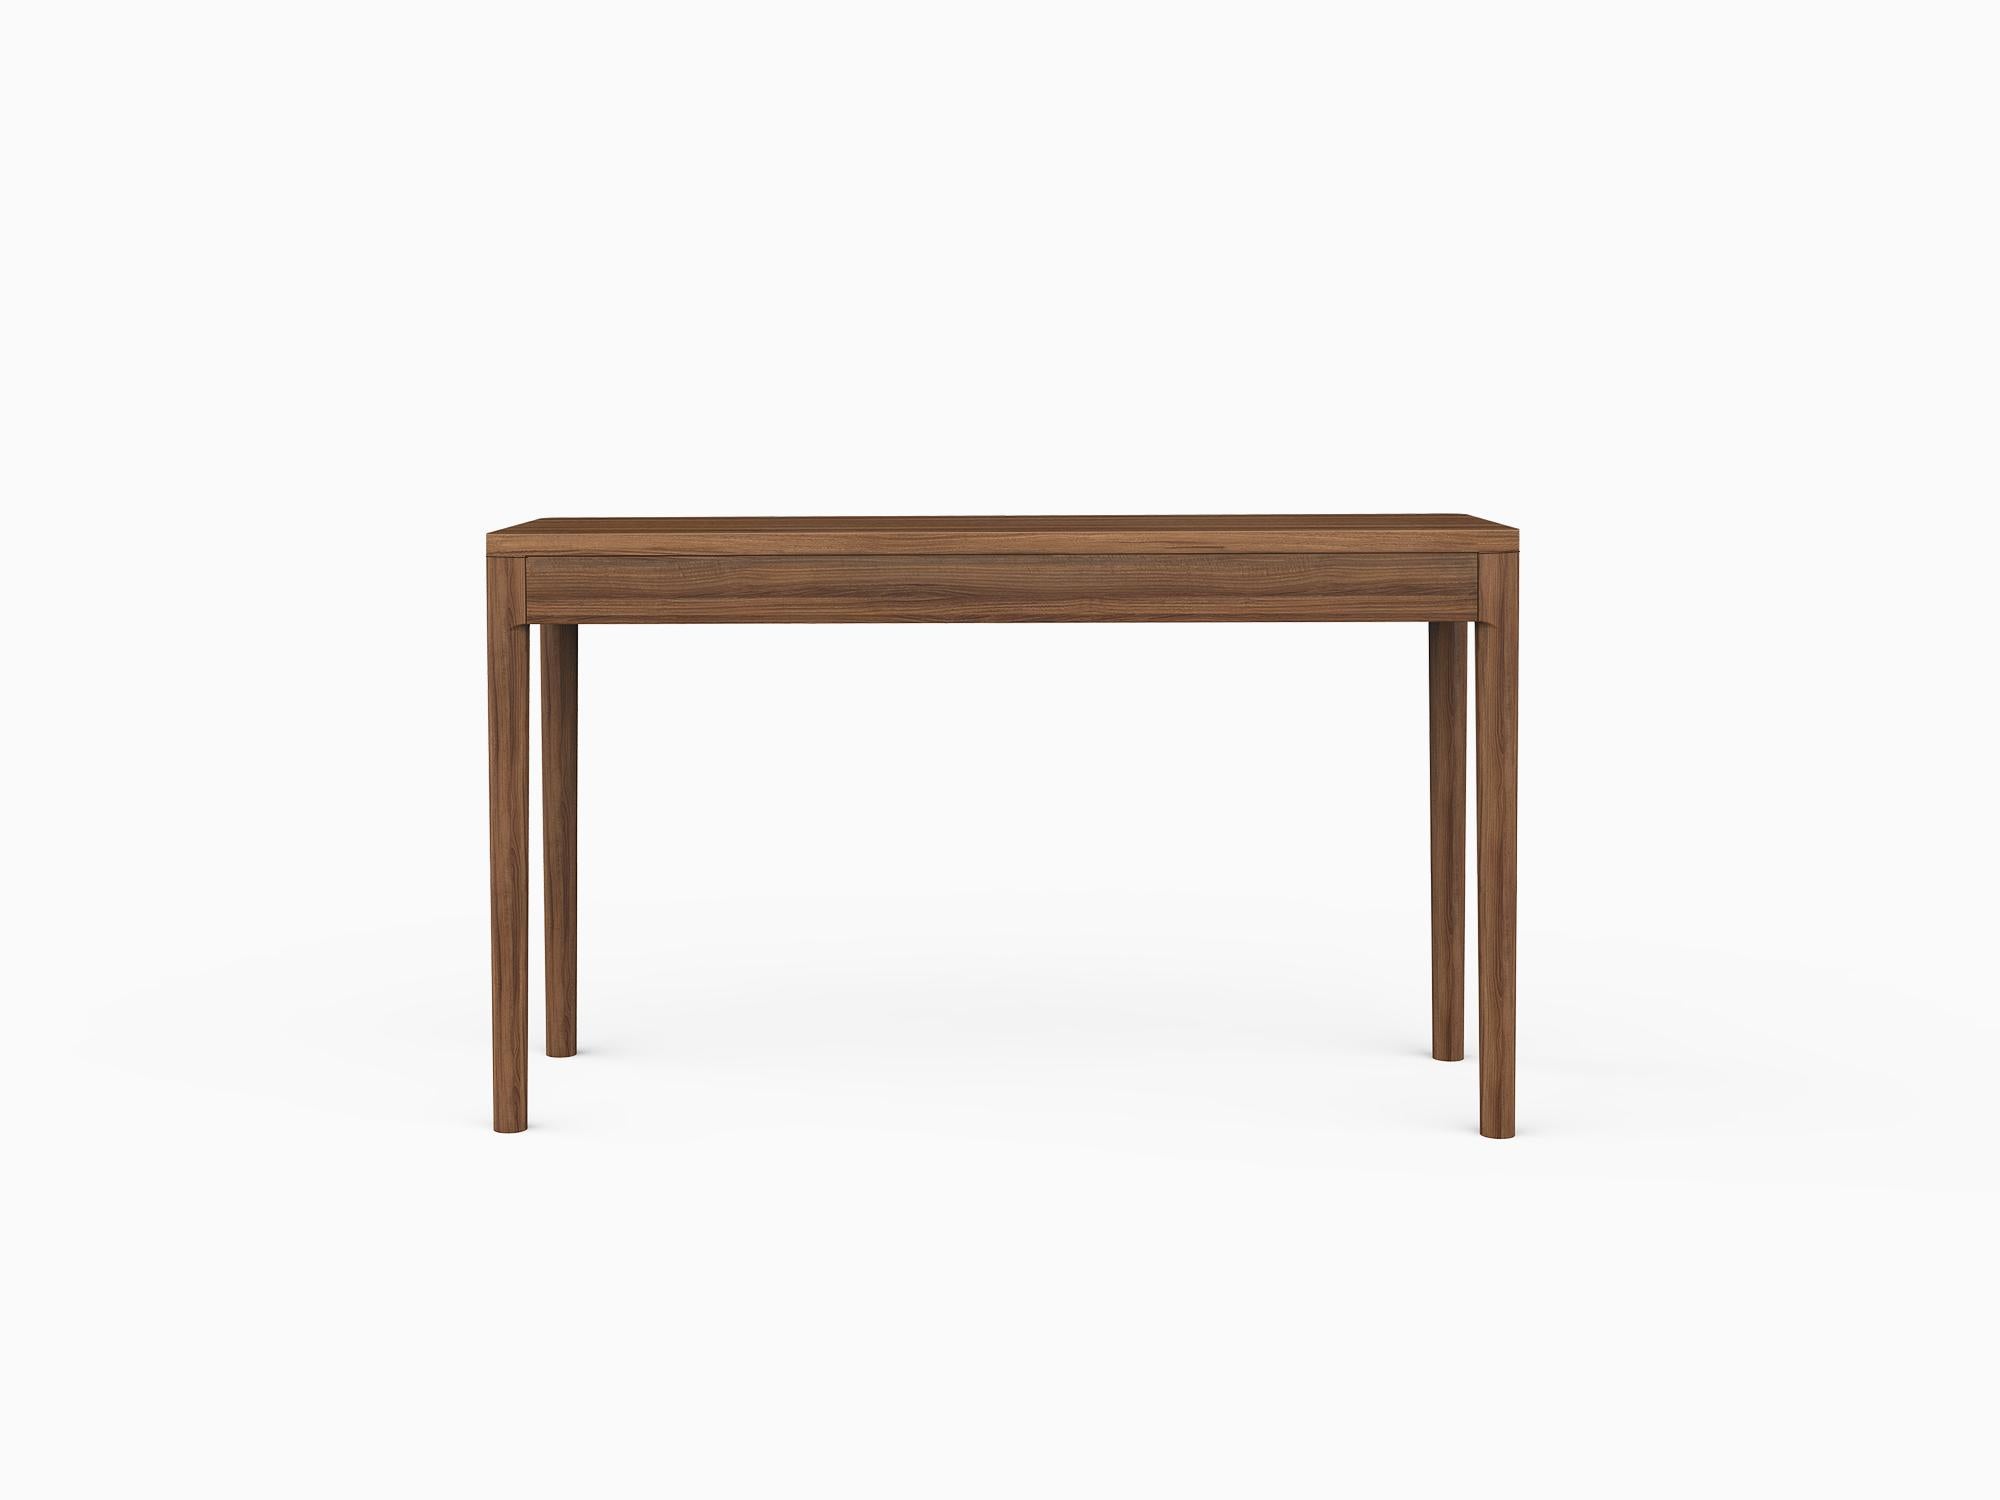 FRONT sideboard is the newest addition to the FRONT collection. Inheriting the same clean-lined and minimal design, this sideboard easily blends with the most varied spaces and styles, but not without upholding and affirming its presence.

FRONT